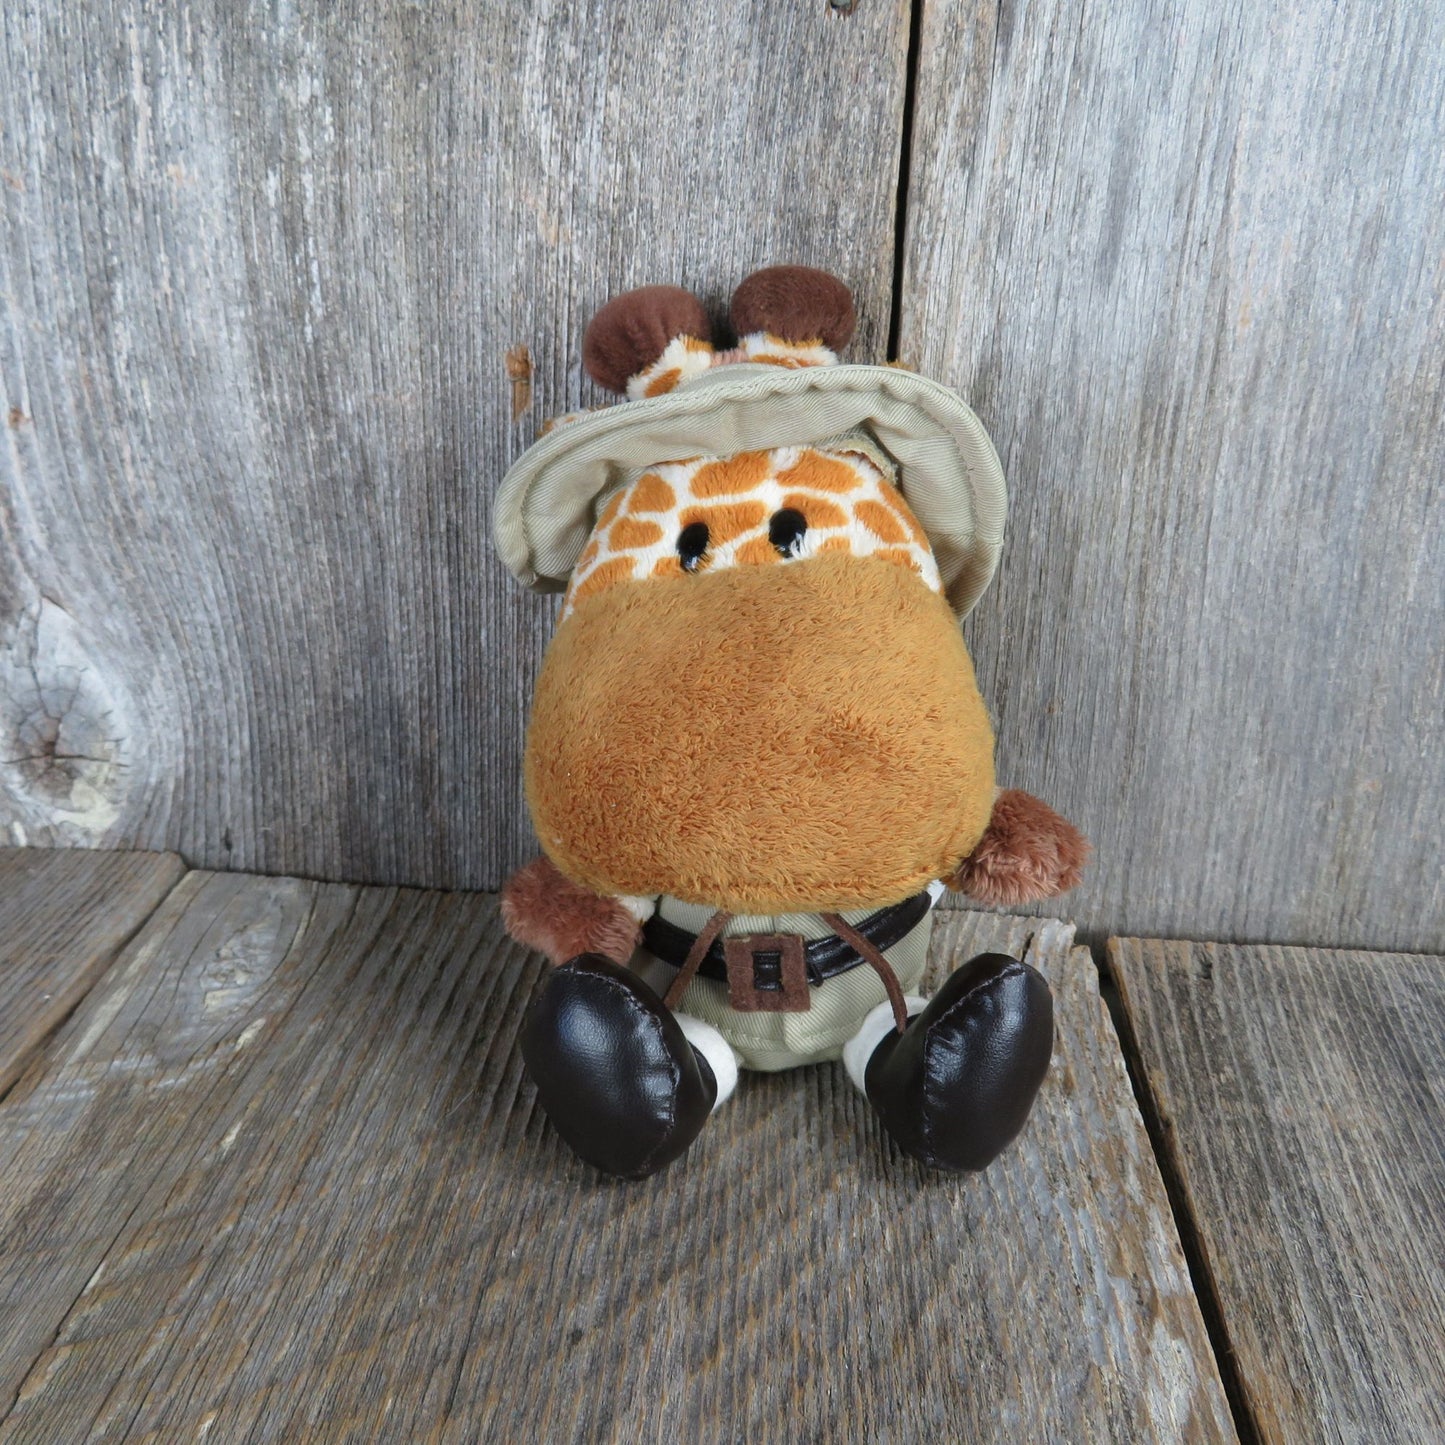 Big Head Giraffe in Safari Hat and Clothes Plush Beanie Weighted Bestever Toys Stuffed Animal